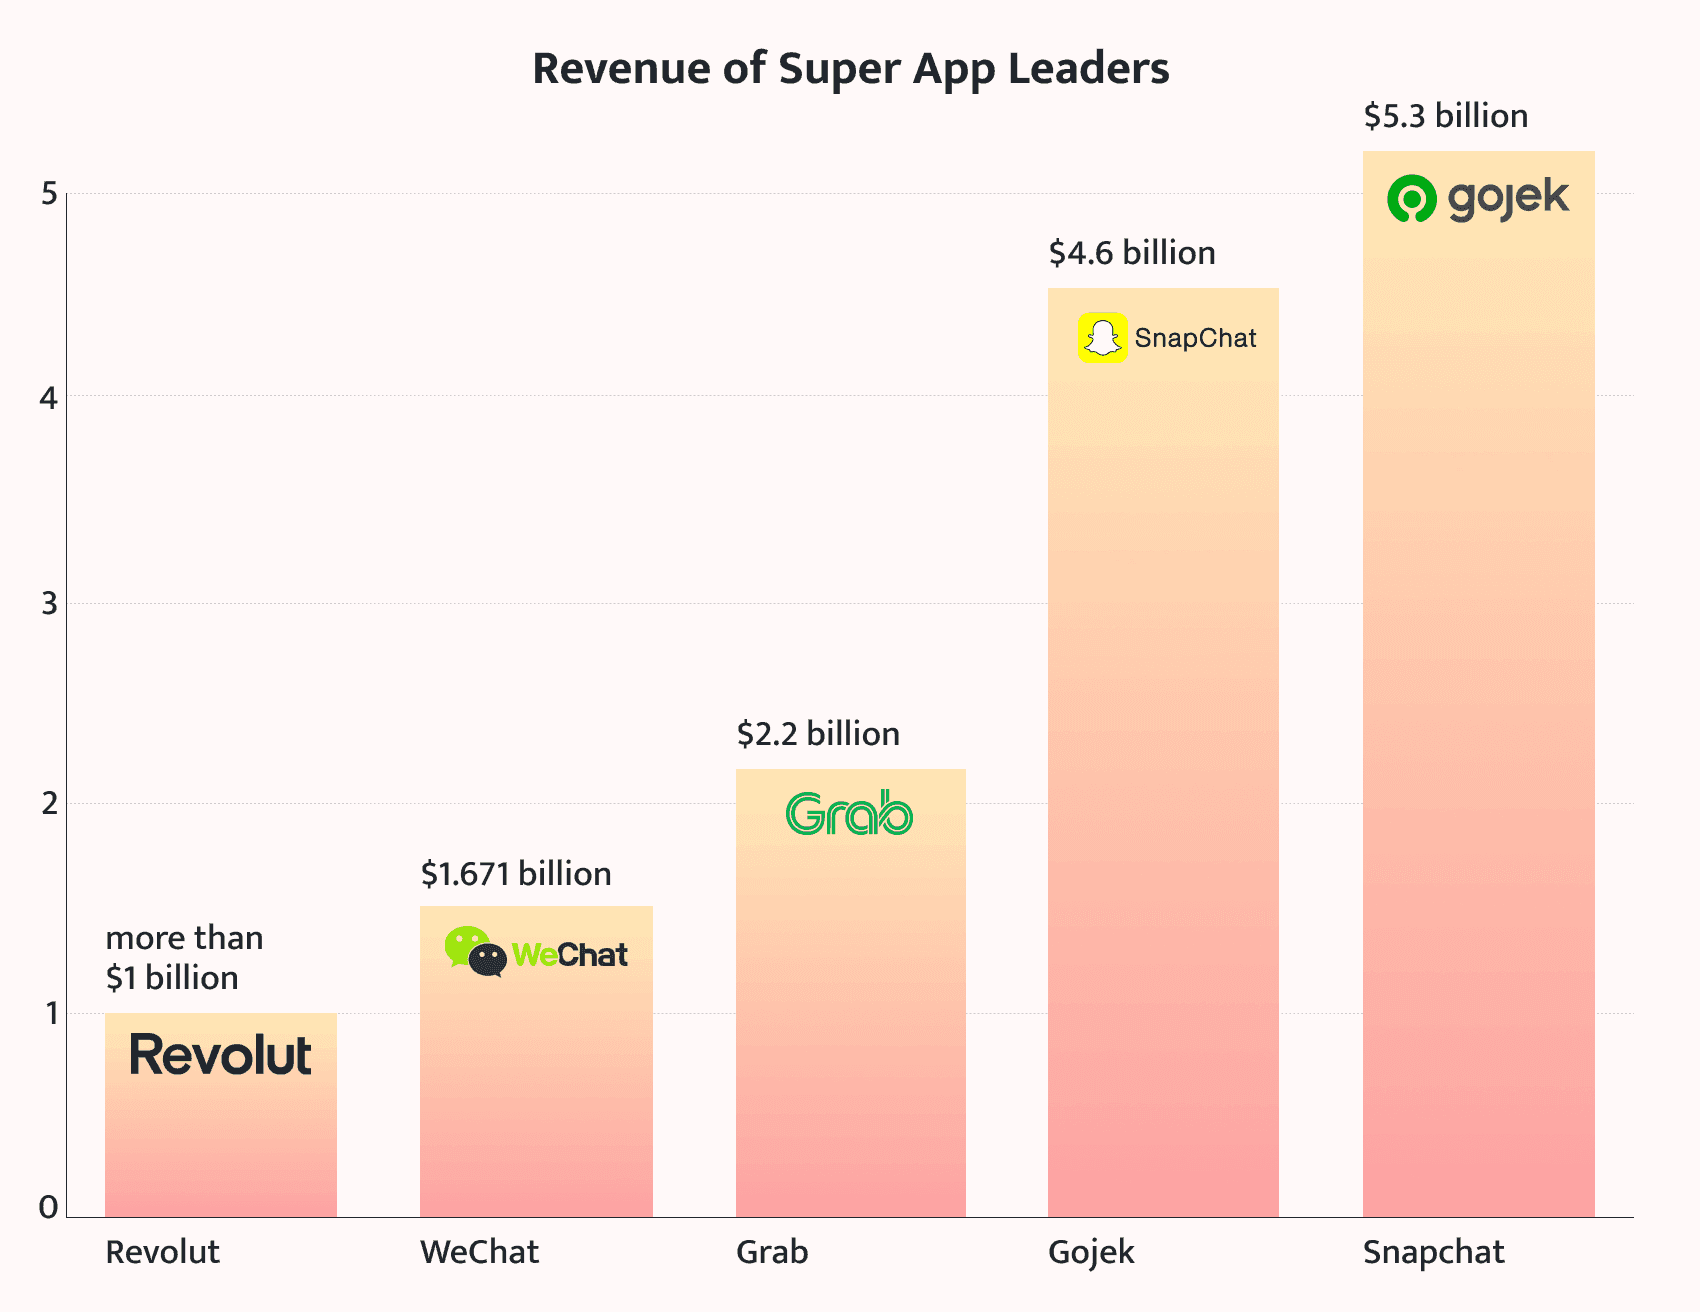 examples of successful super apps